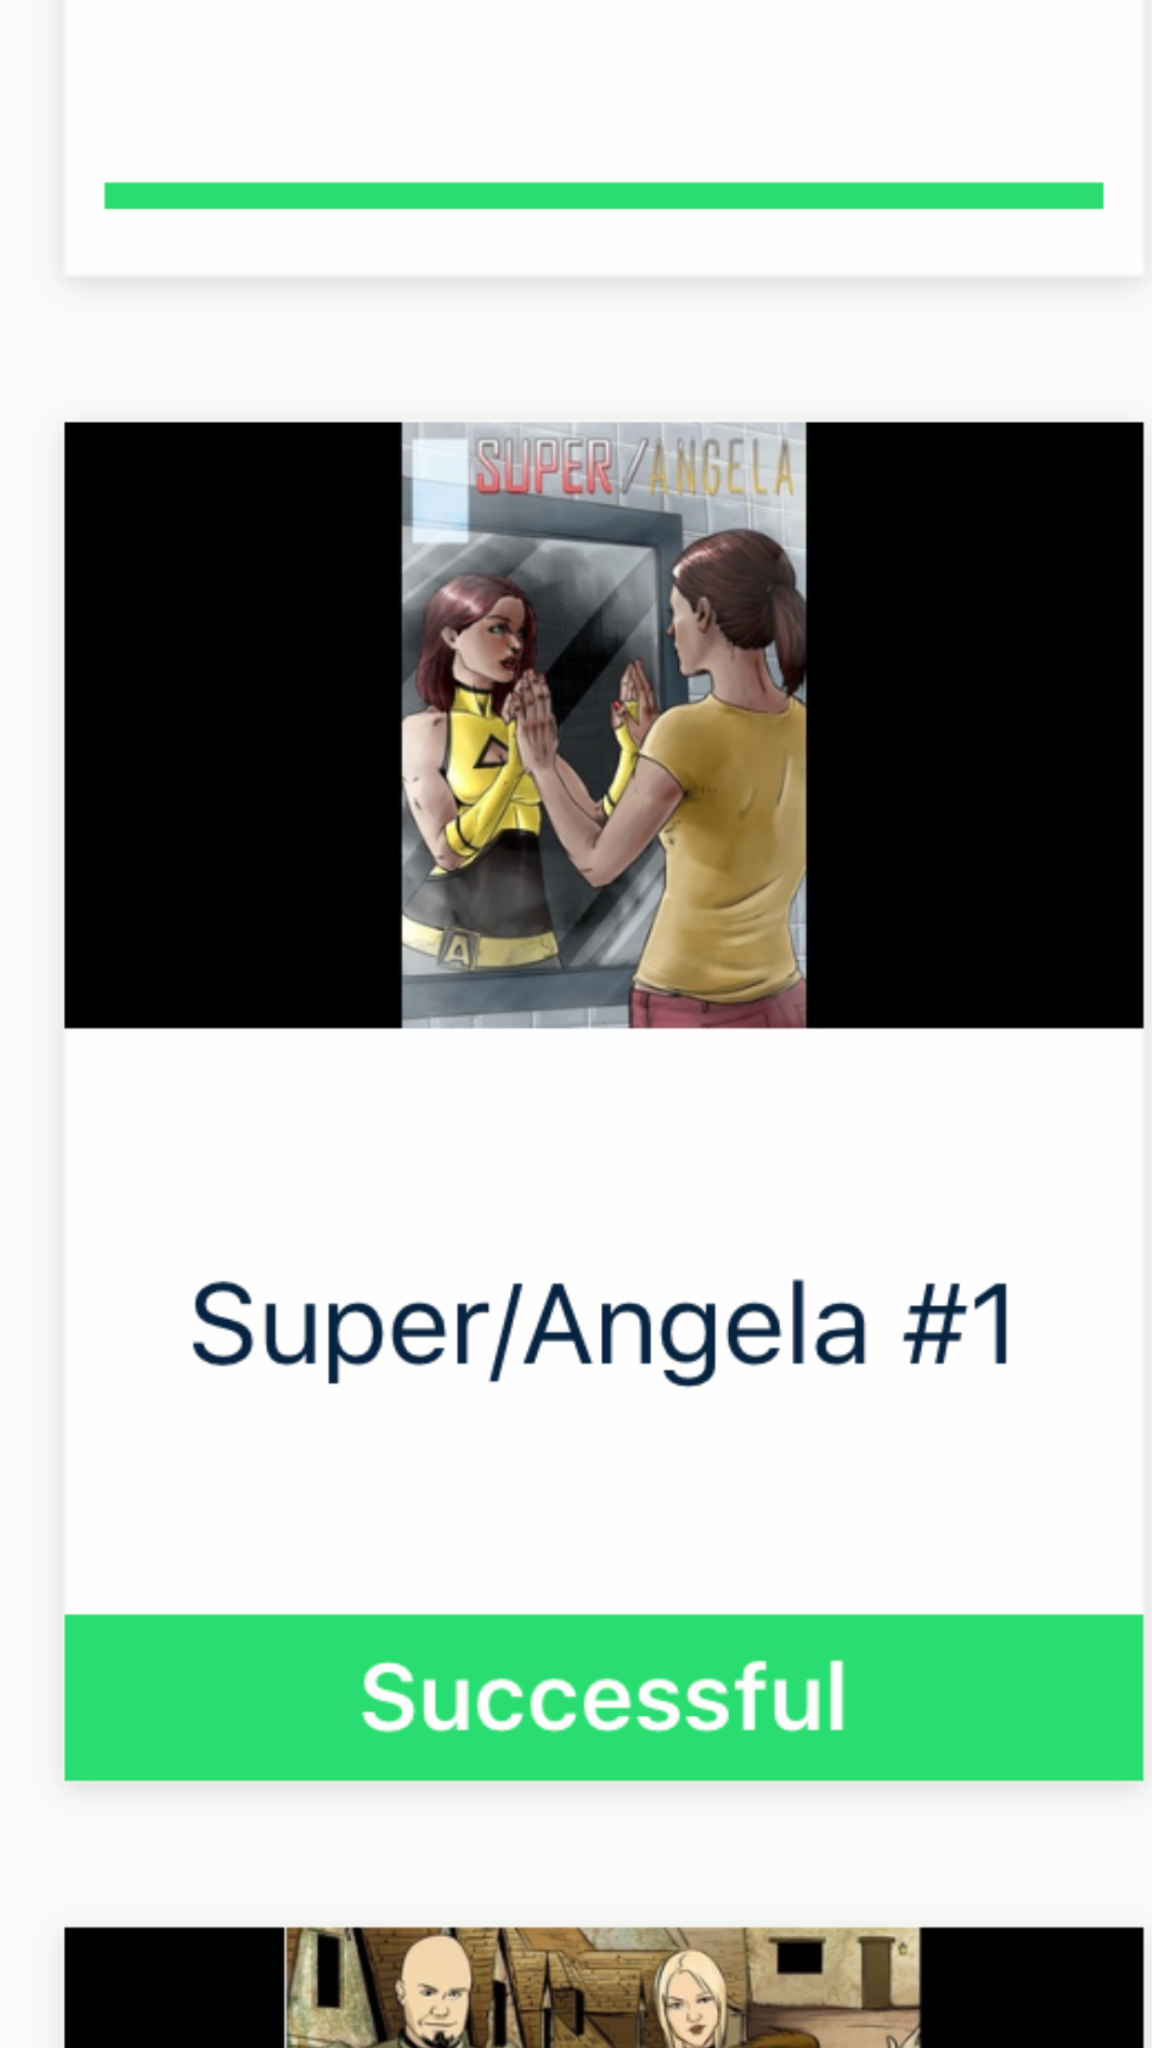 Con-grads to the Super/Angela #1 Team on successfully campaigning